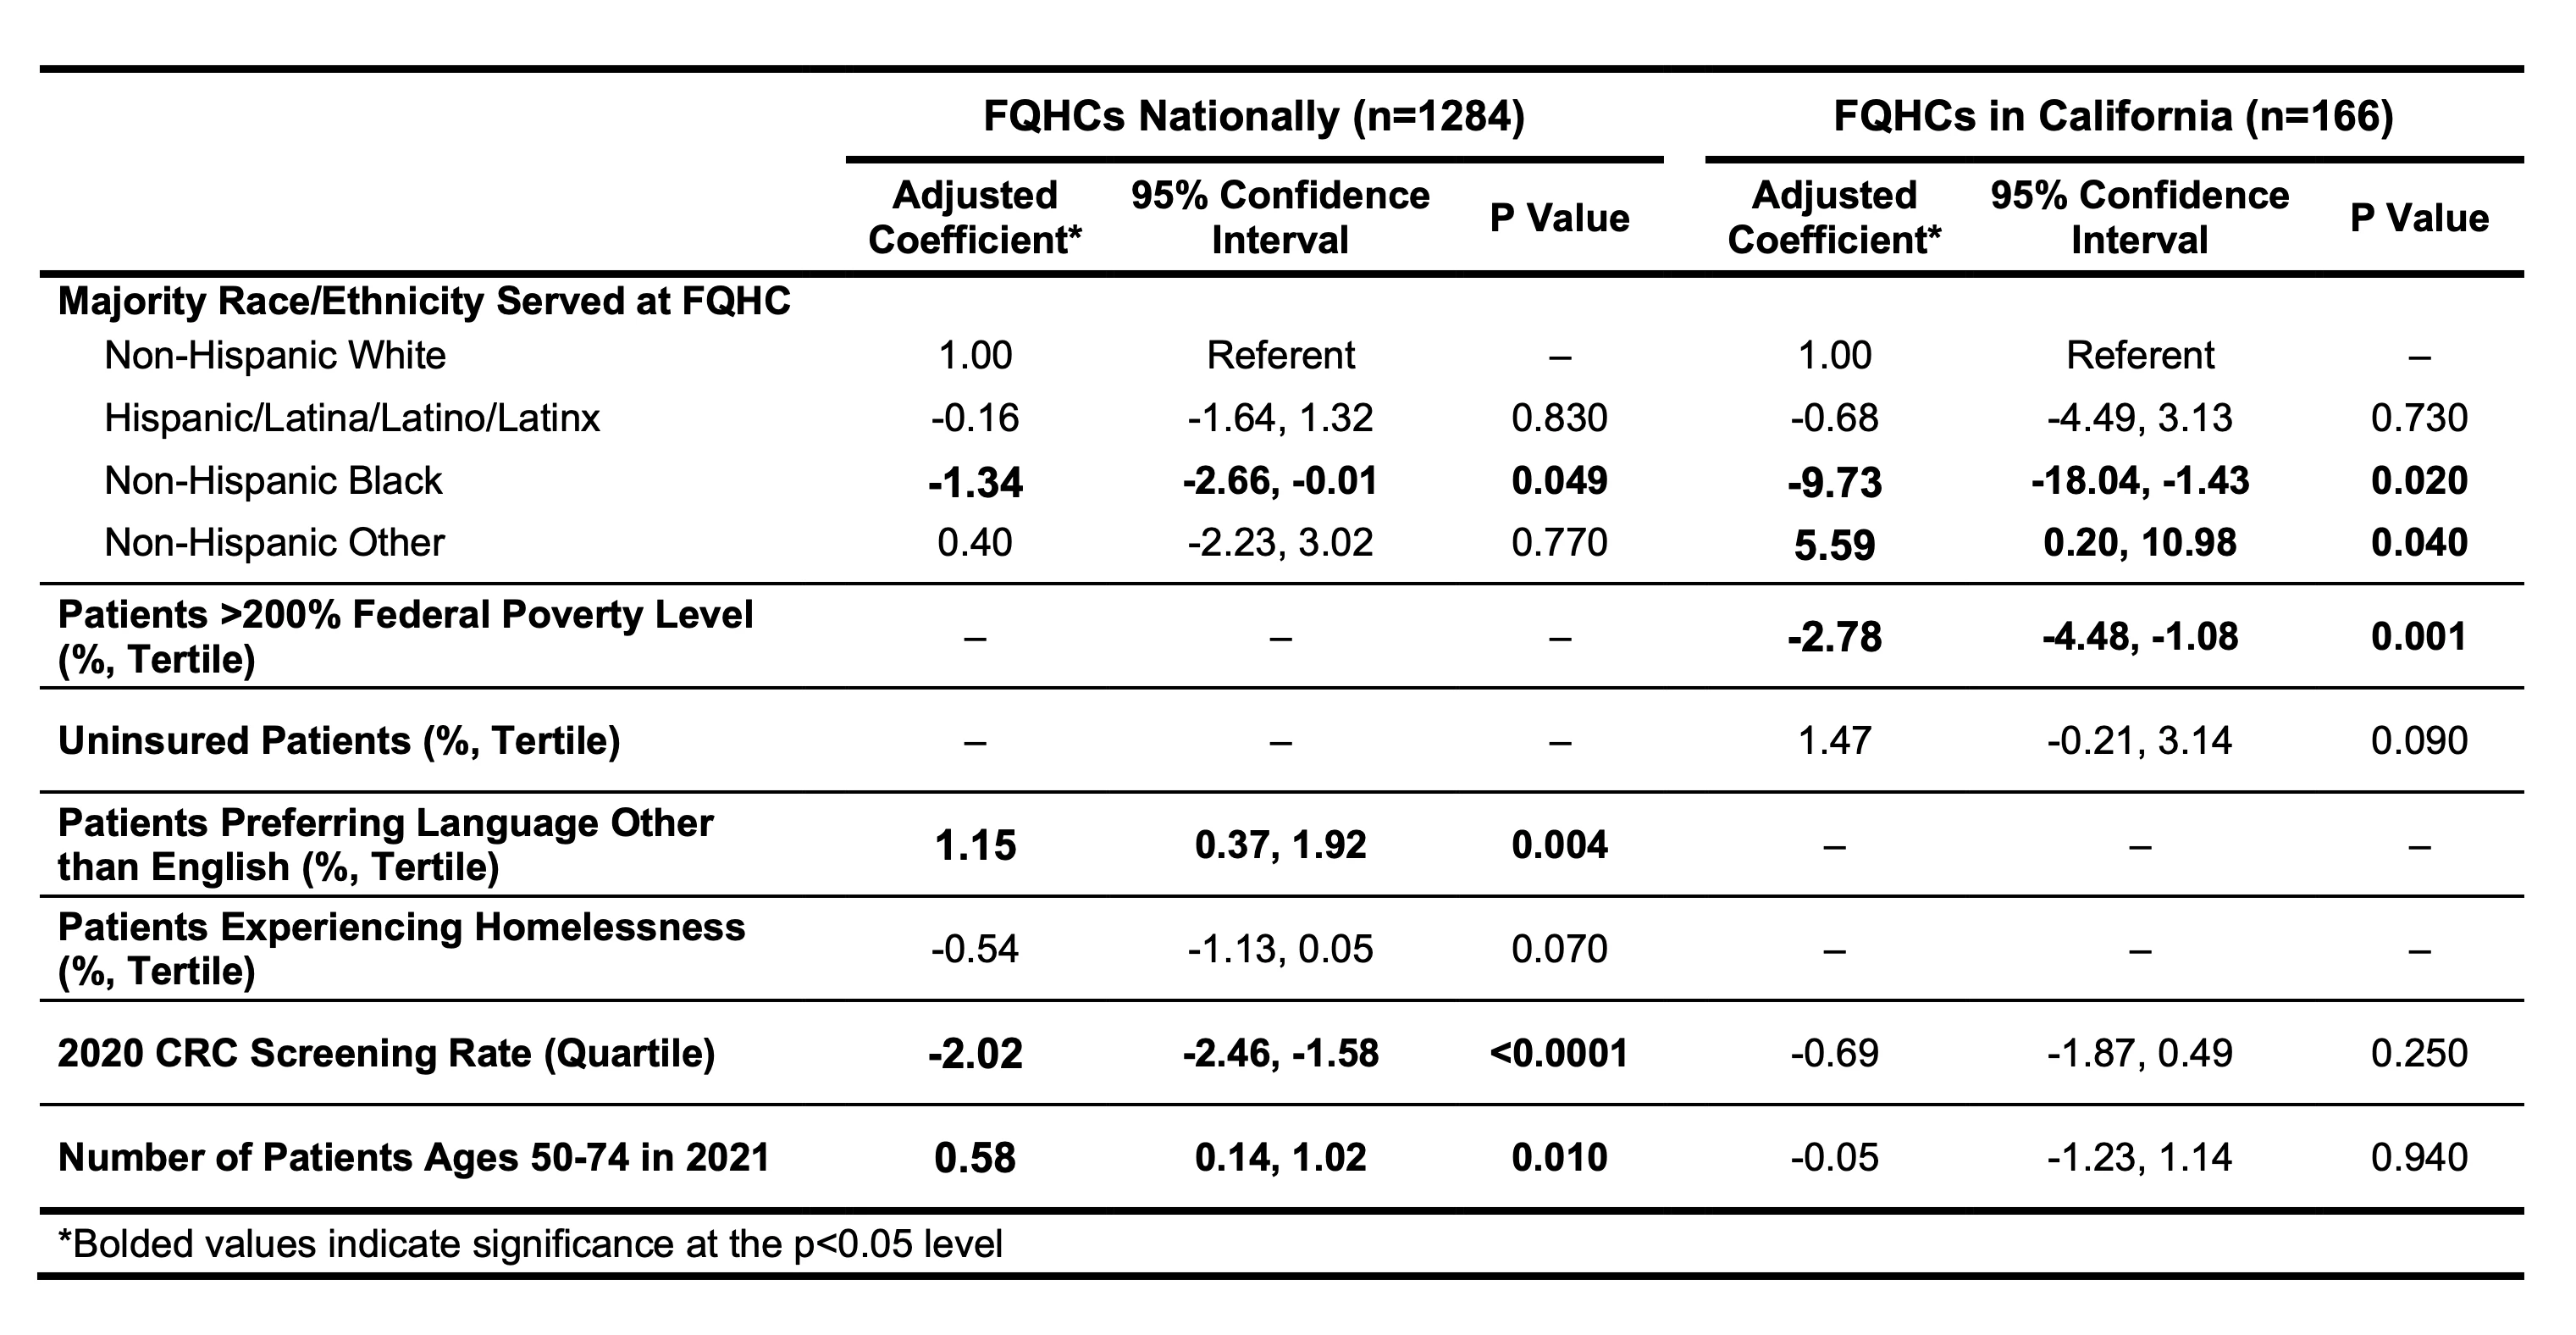 <b>Table</b>. Clinic-level factors associated with colorectal cancer (CRC) screening rate change from 2020 to 2021 at Federally Qualified Health Centers (FQHCs) in the United States and California, based on mixed effects linear regression.